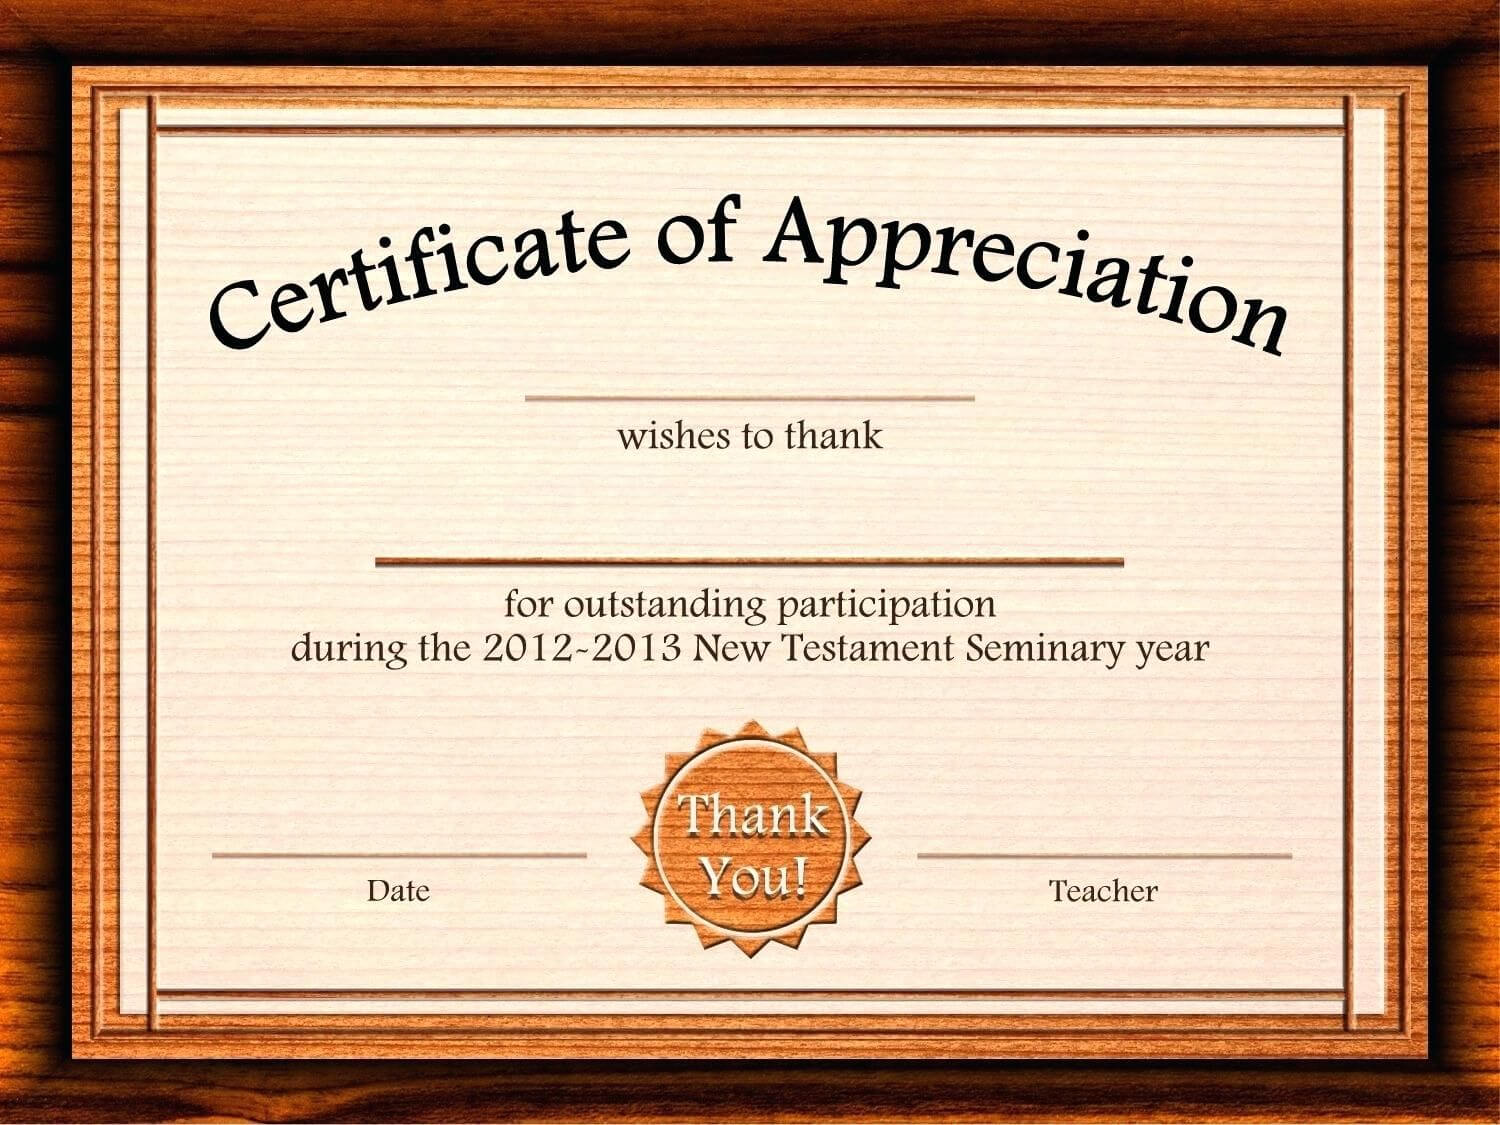 Template: Editable Certificate Of Appreciation Template Free For Professional Certificate Templates For Word